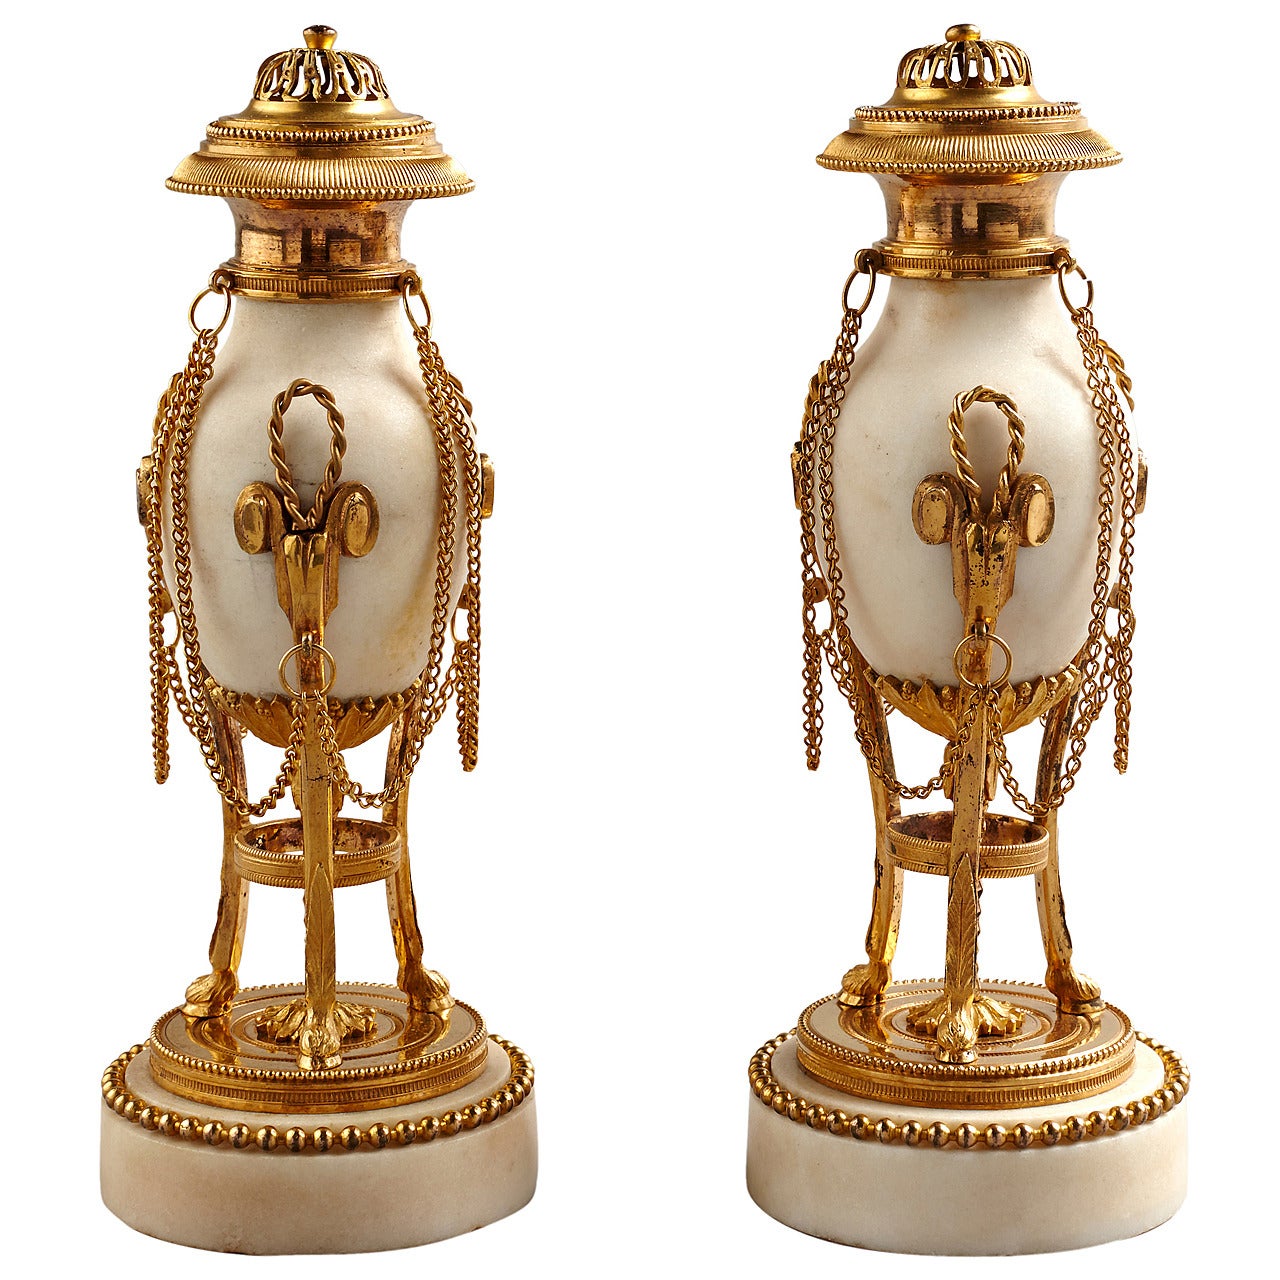 Pair of Late 18th Century Louis XVI Cassolettes Candleholders For Sale